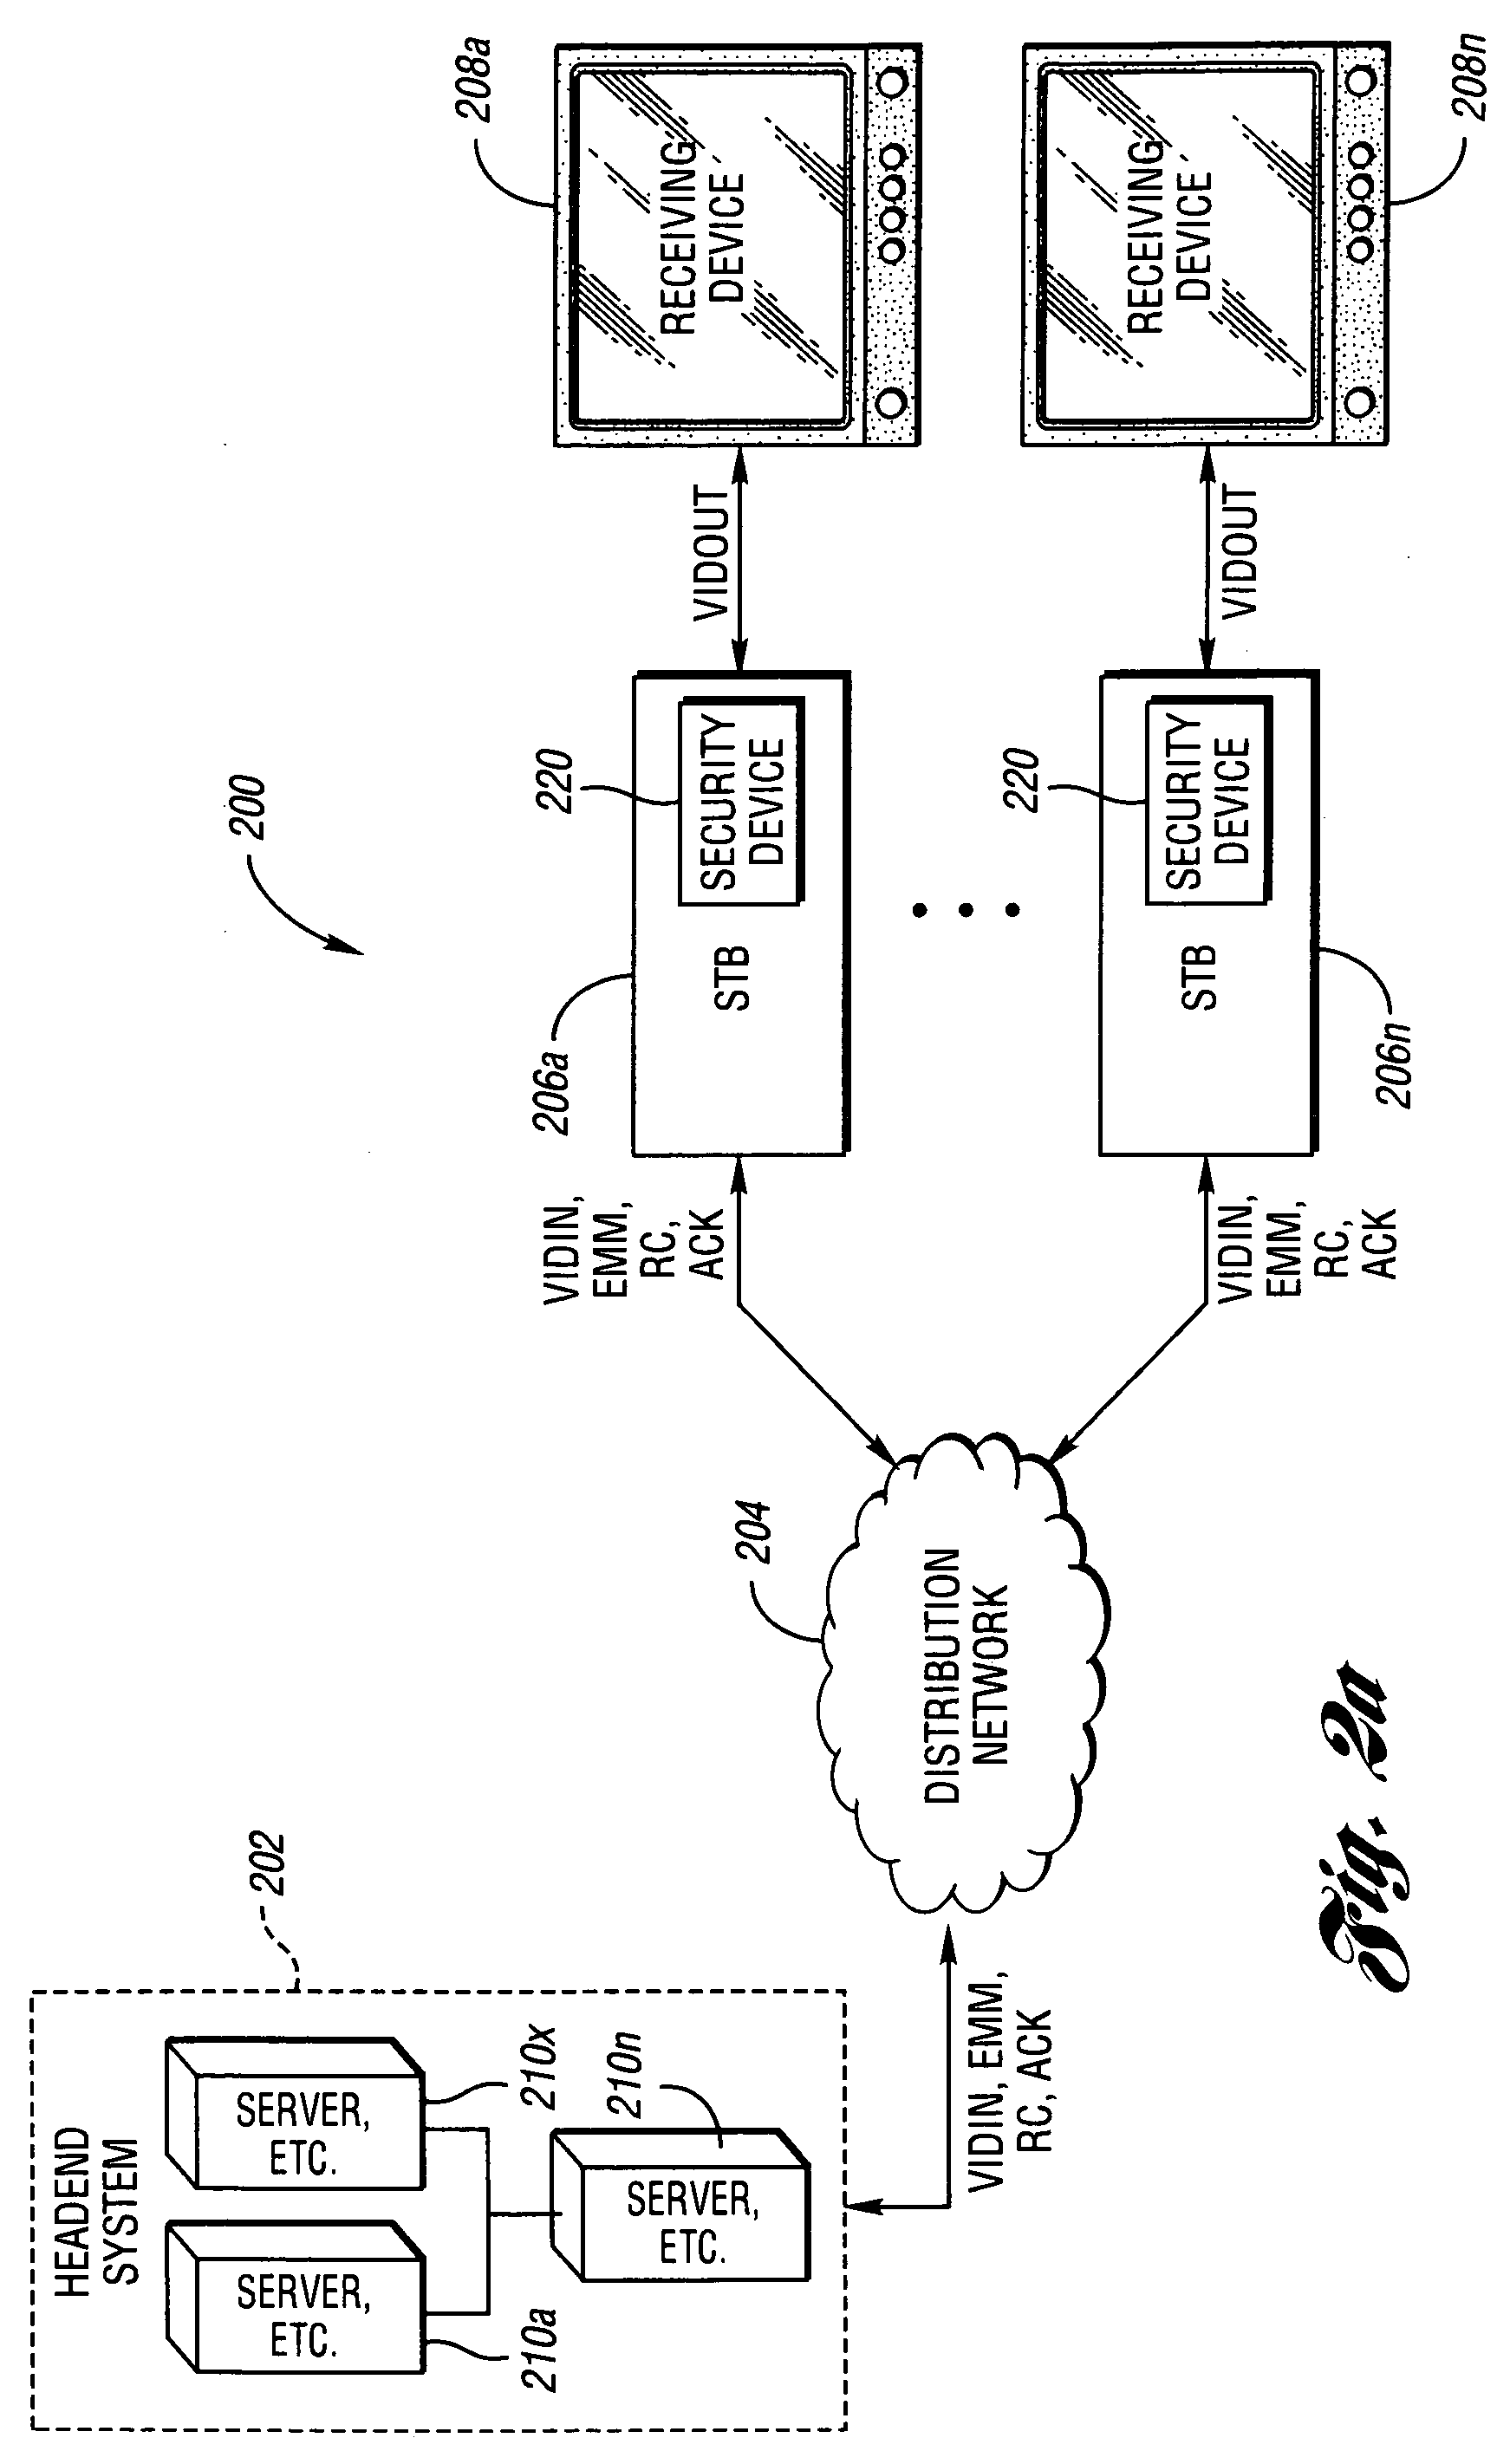 System and method for secure conditional access download and reconfiguration